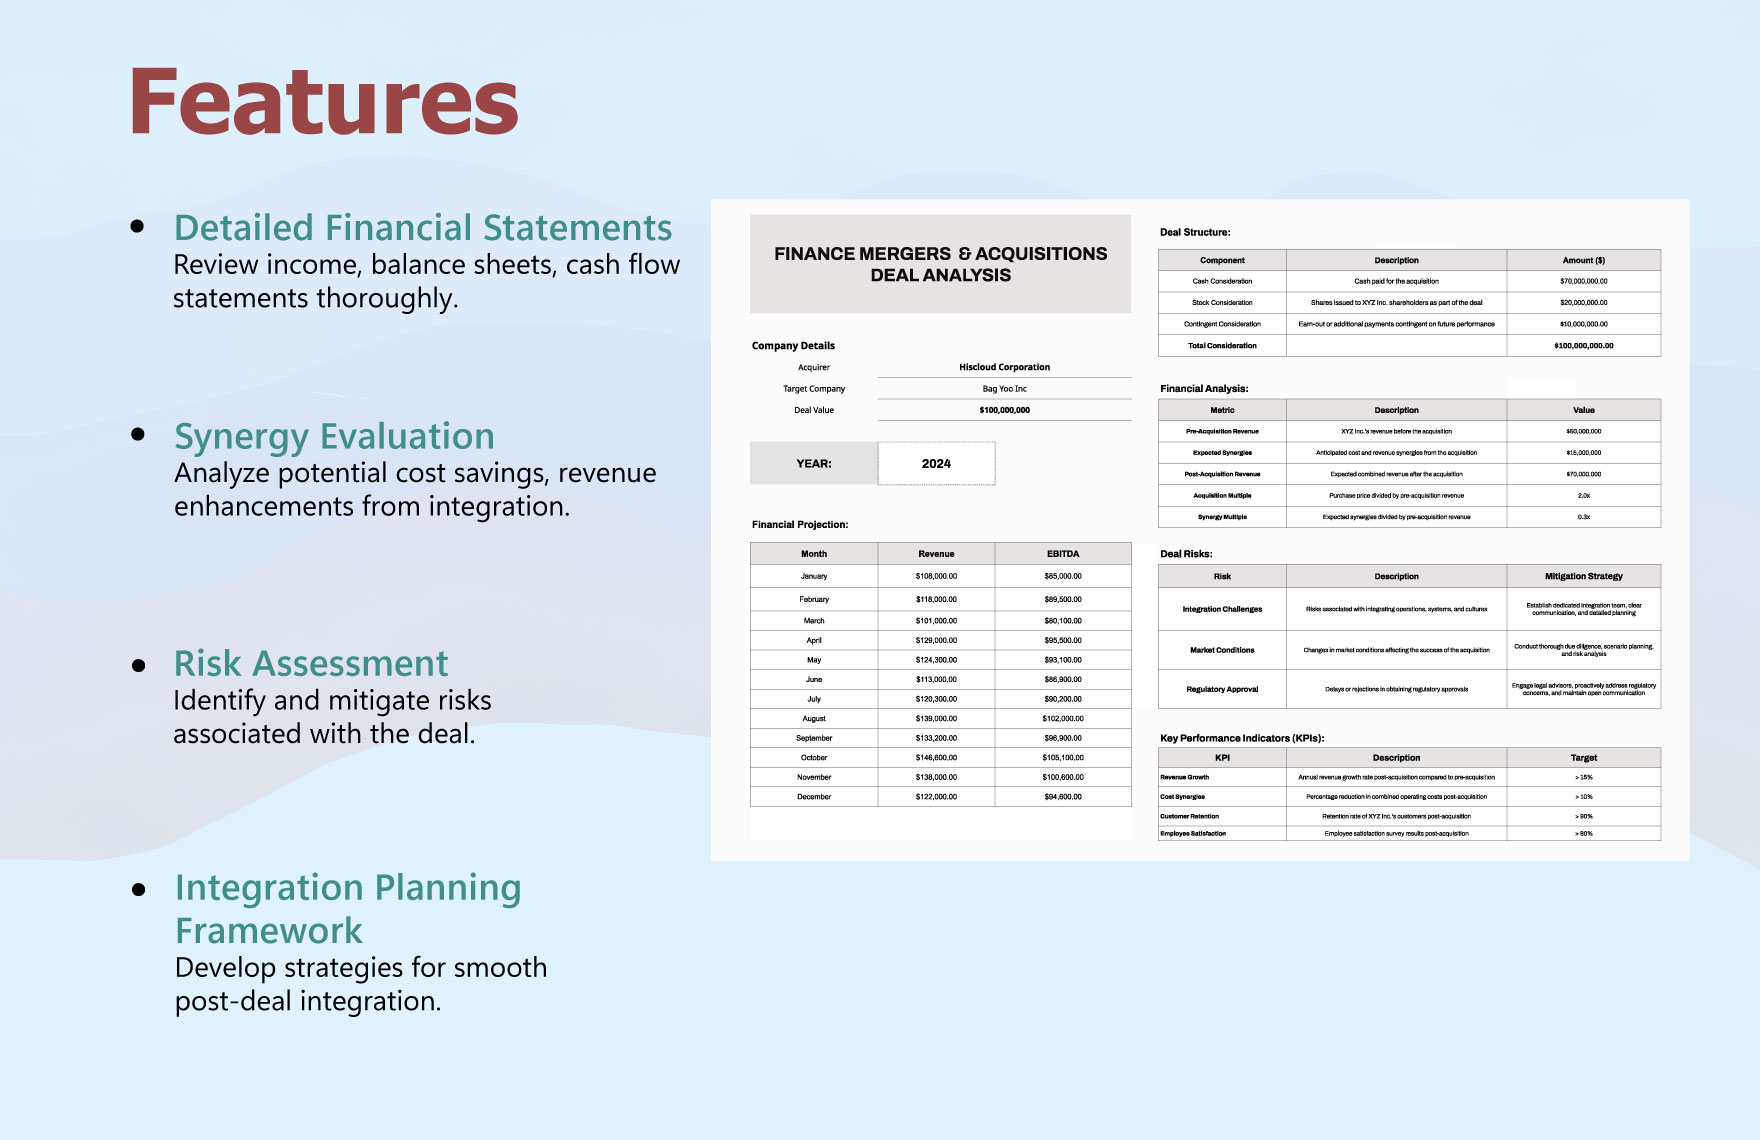 Finance Mergers & Acquisitions Deal Analysis Template